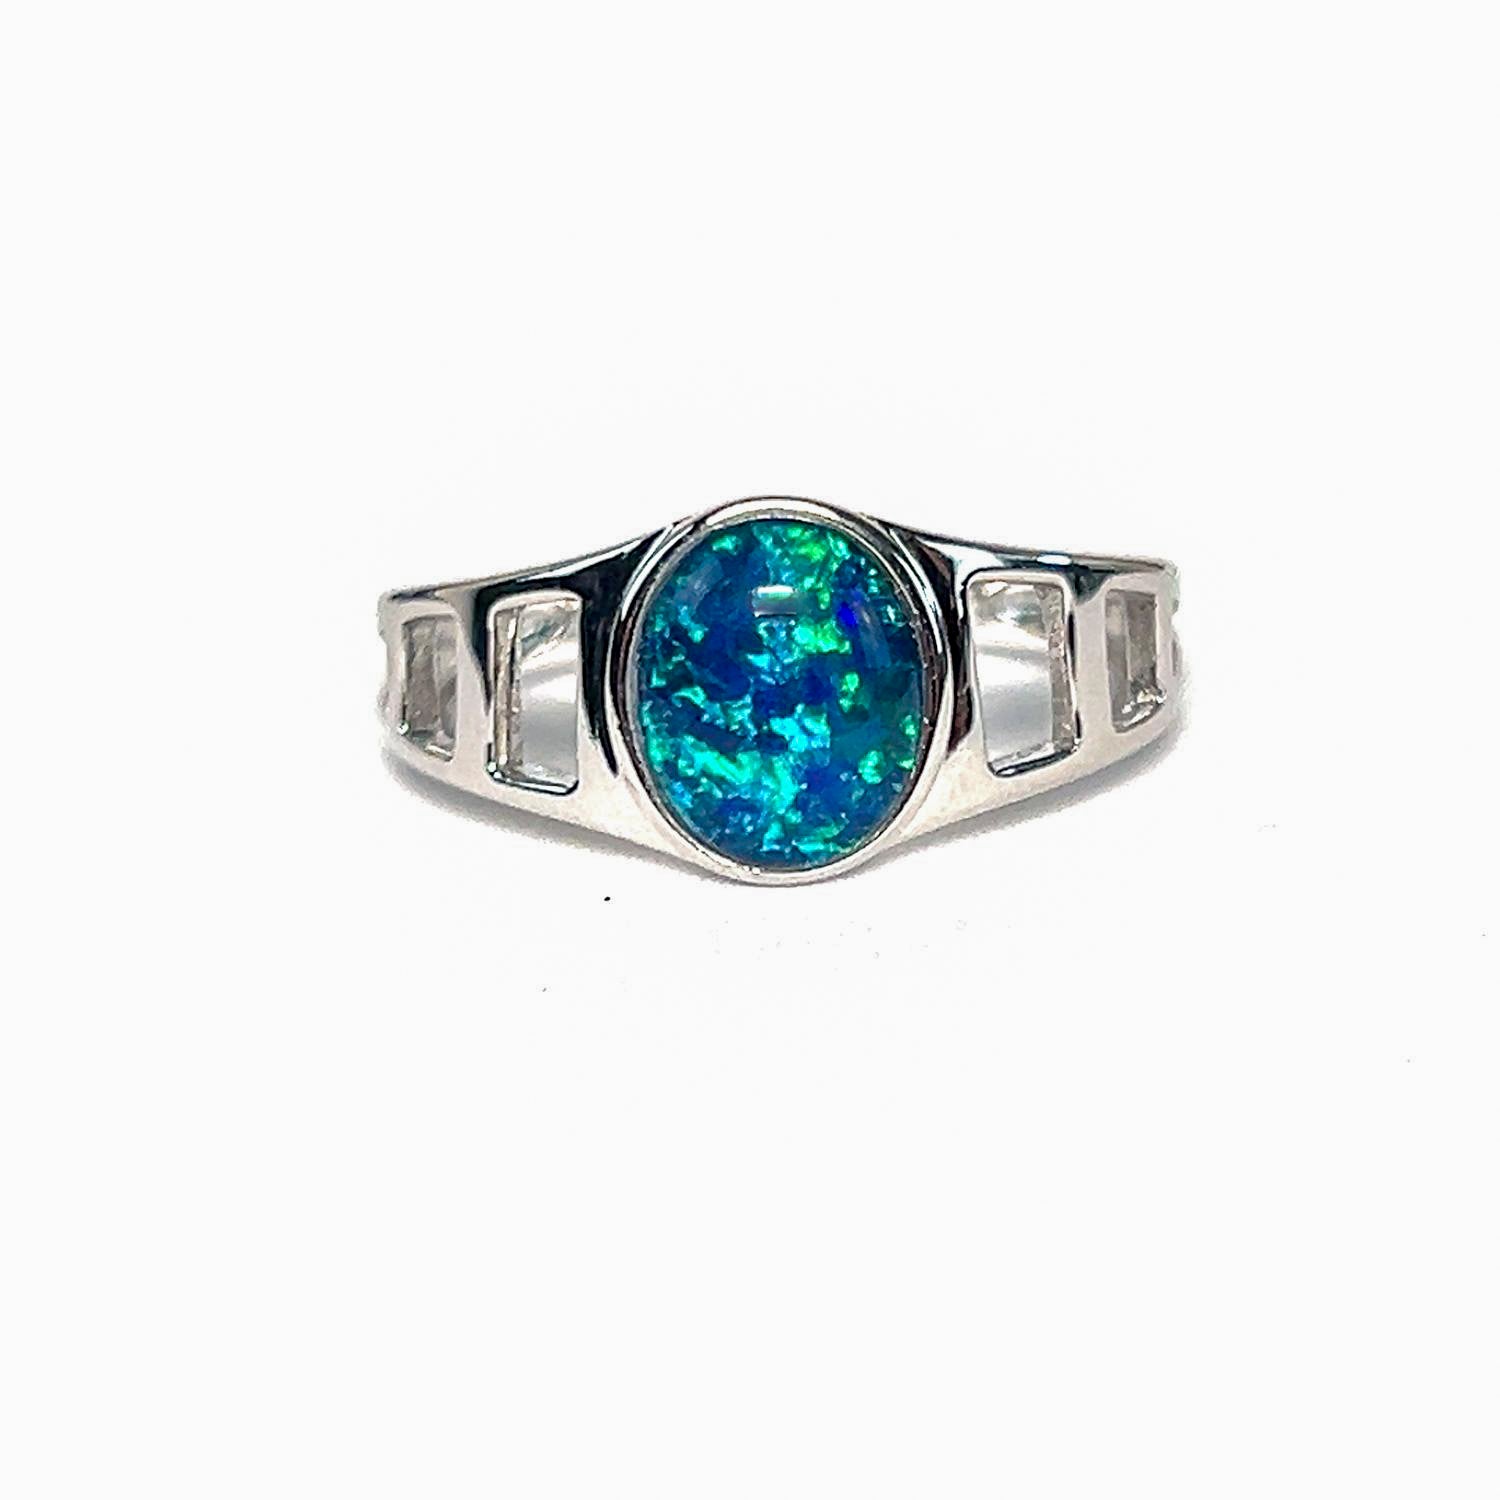 Sterling Silver cut out Opal triplet gents ring 10x8mm Blue Green